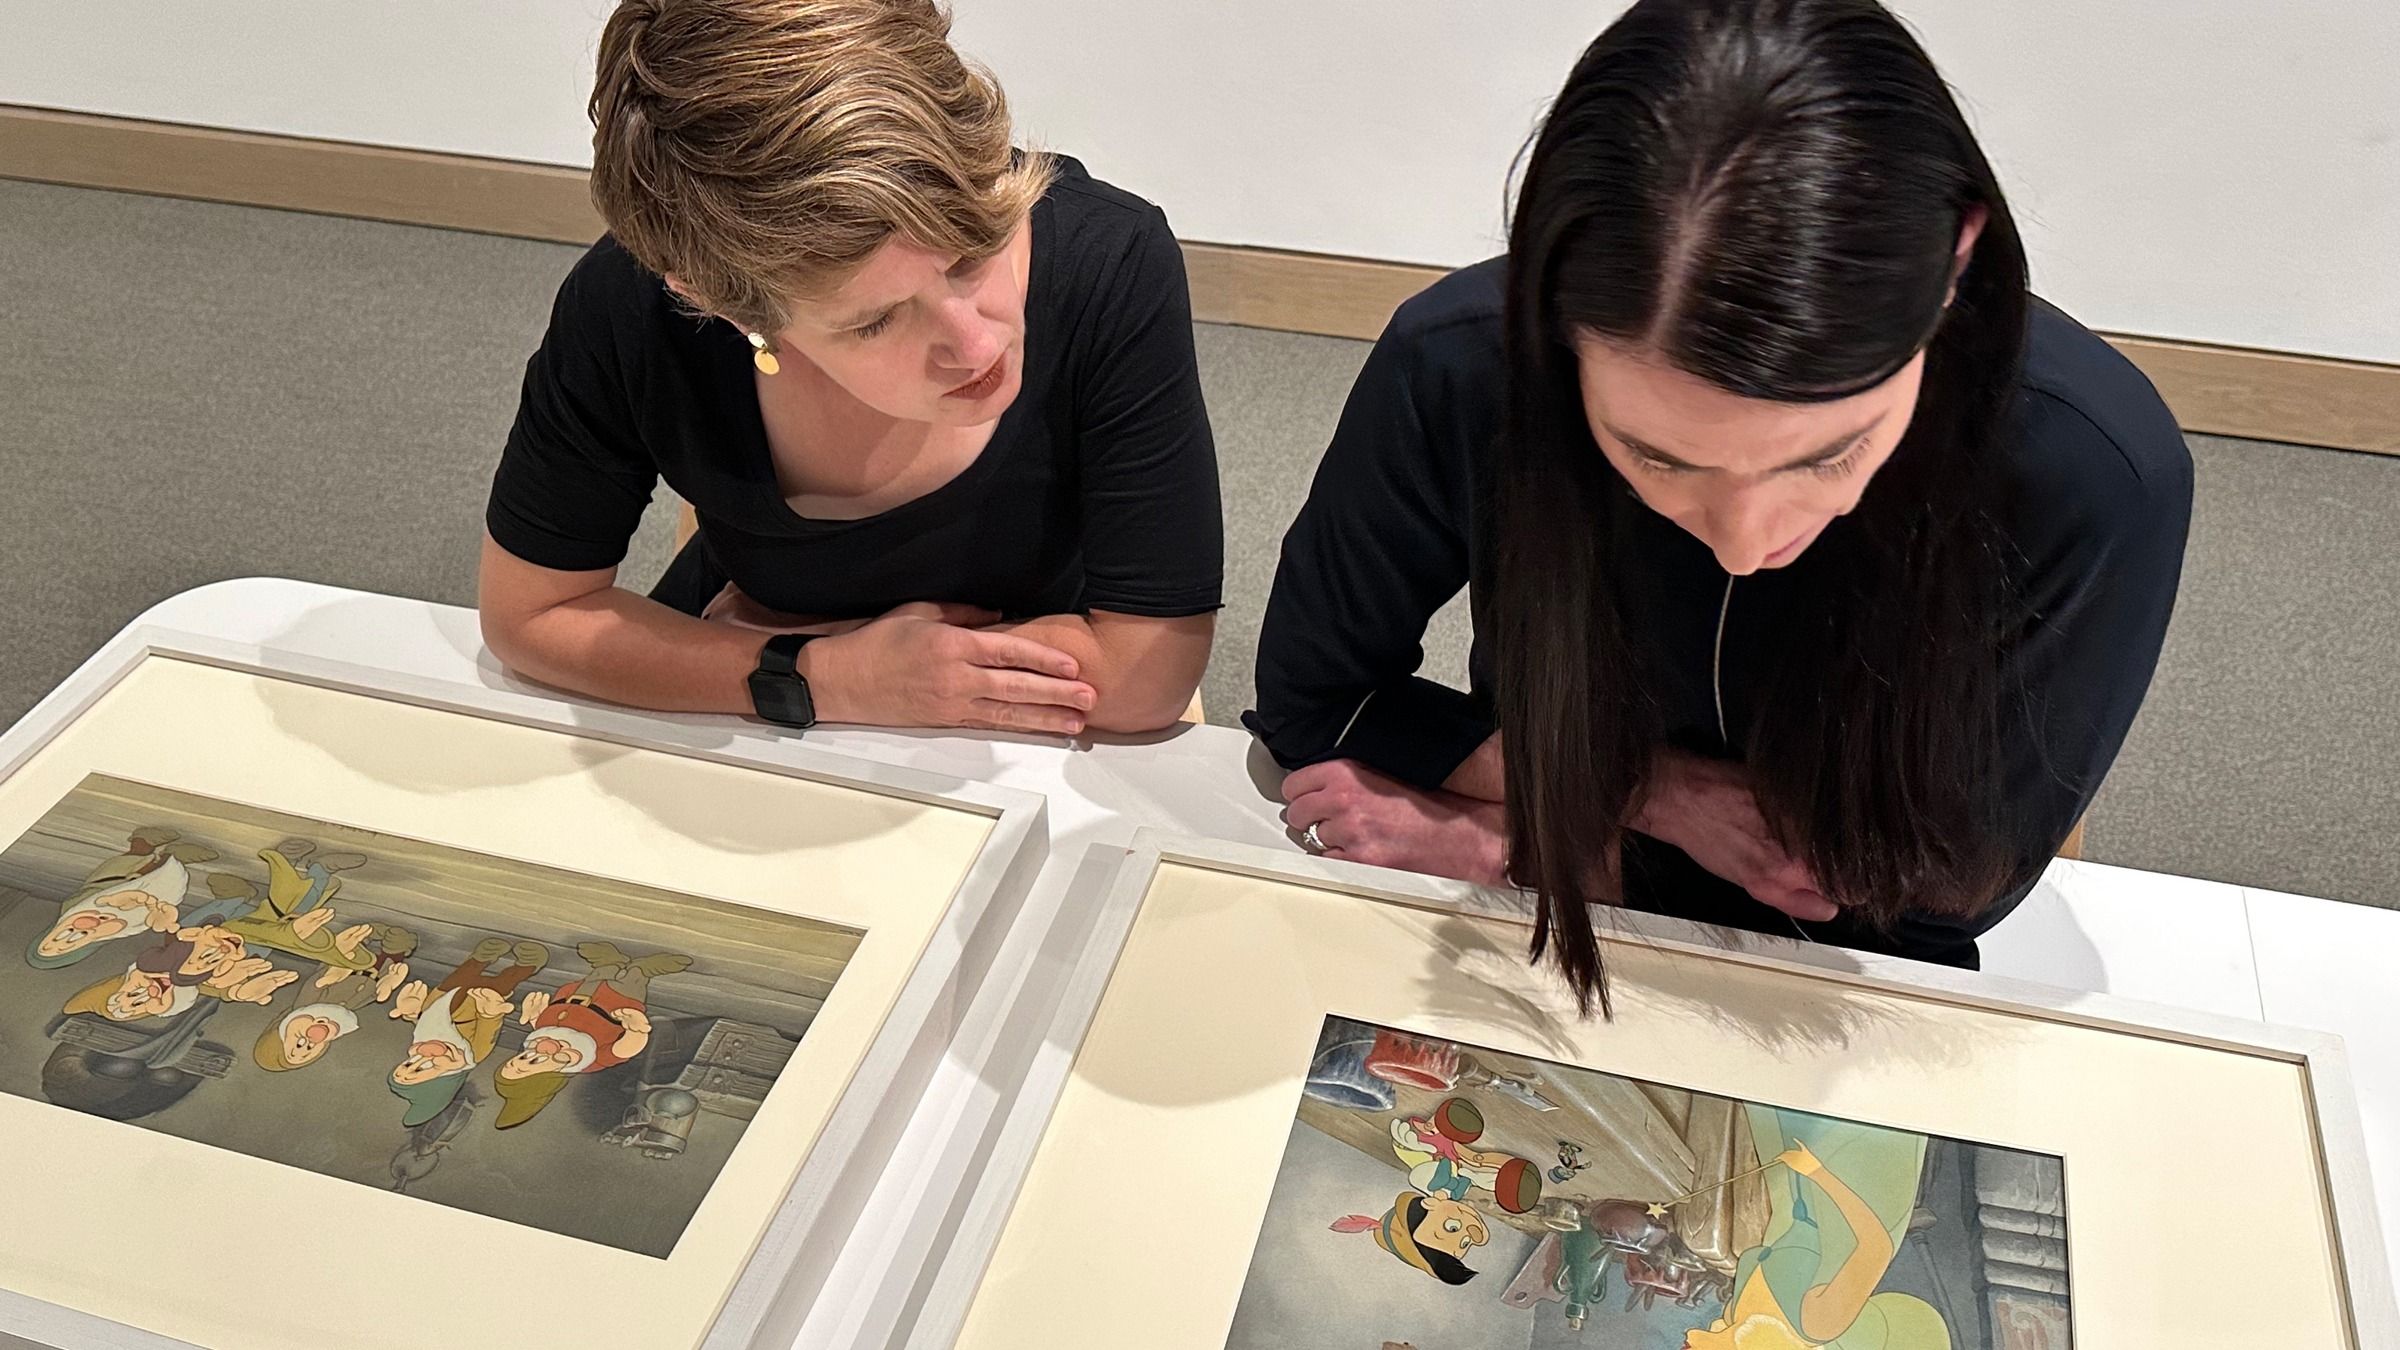 Heather Holian and Emily Stamey looks over frames from Disney's "Pinocchio" and "Snow White"